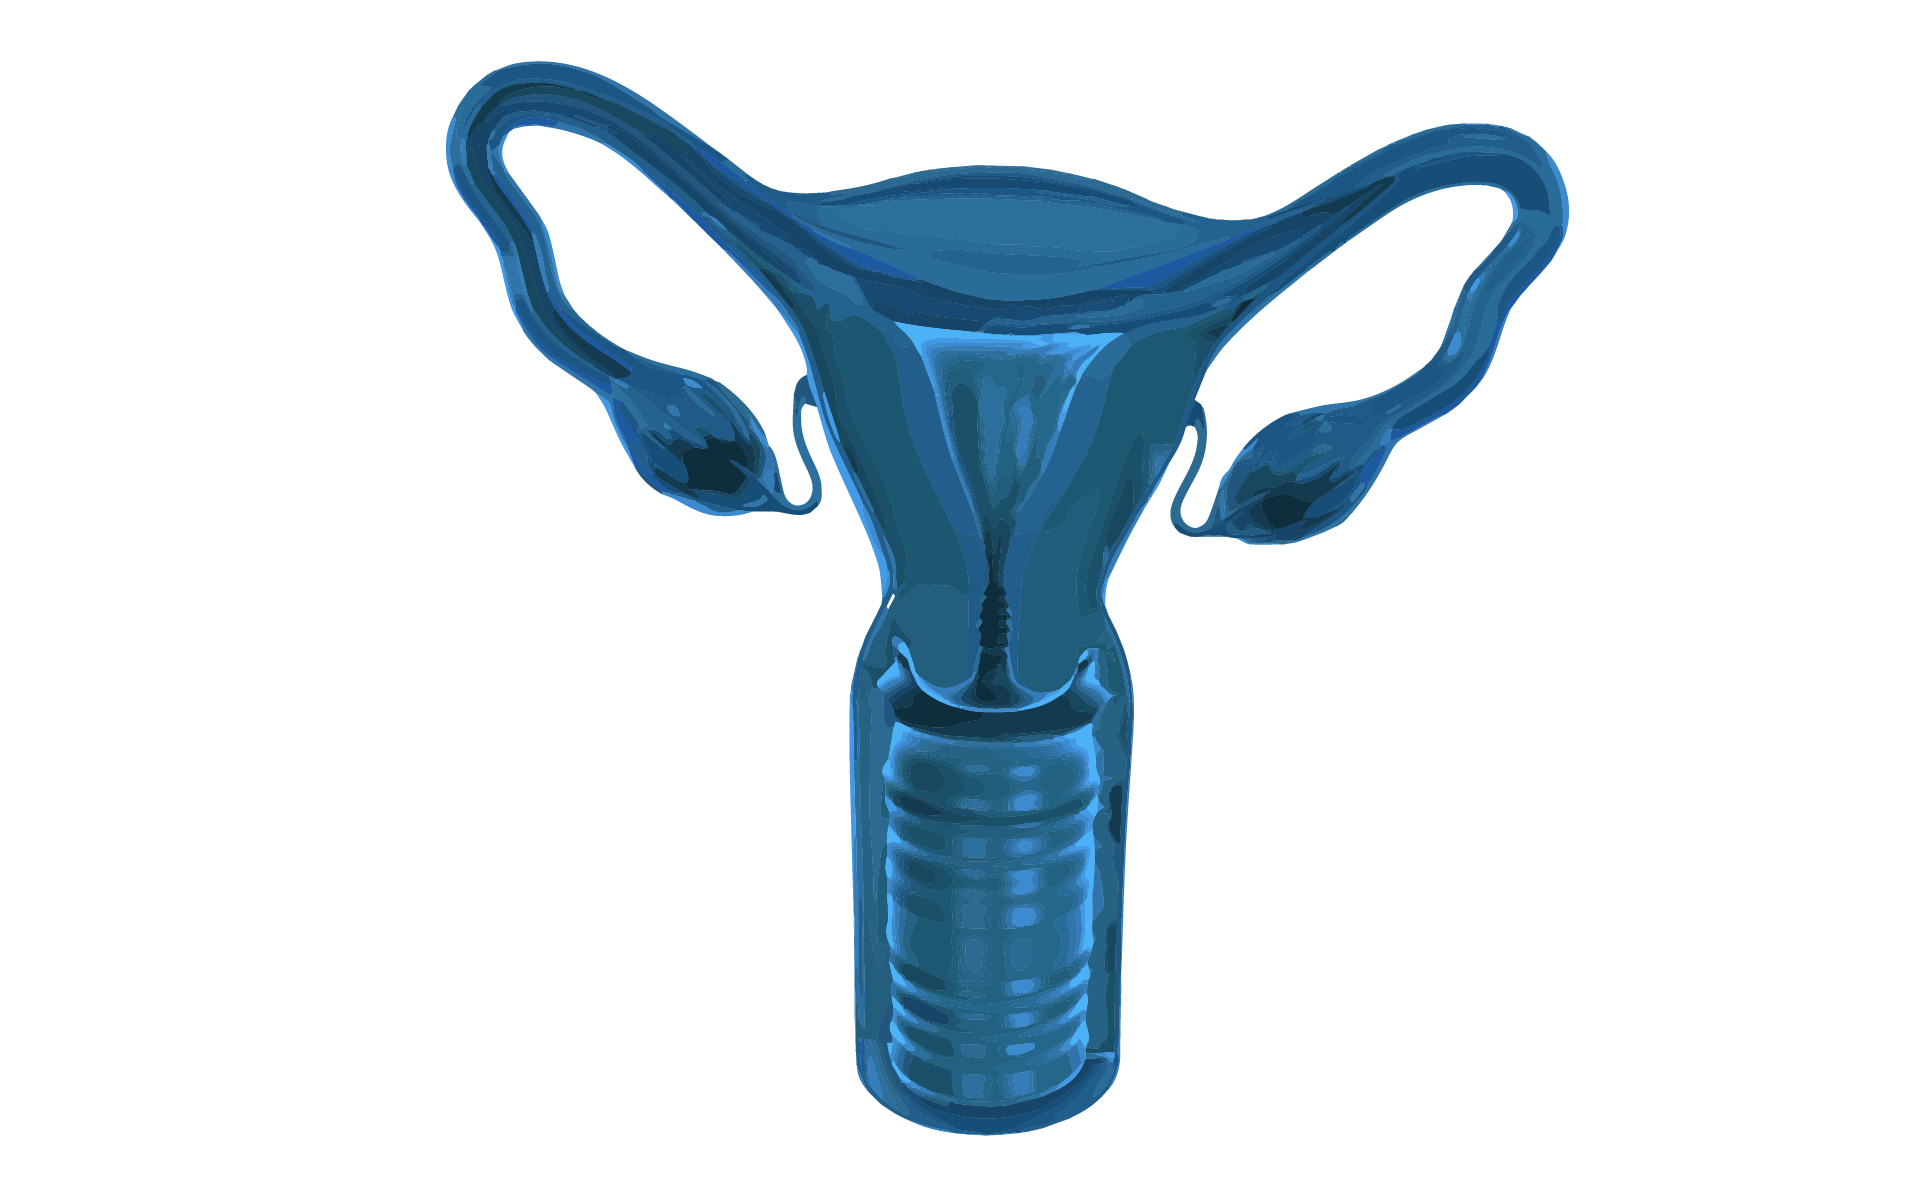 A 3D graphic image of the human female reproductive system